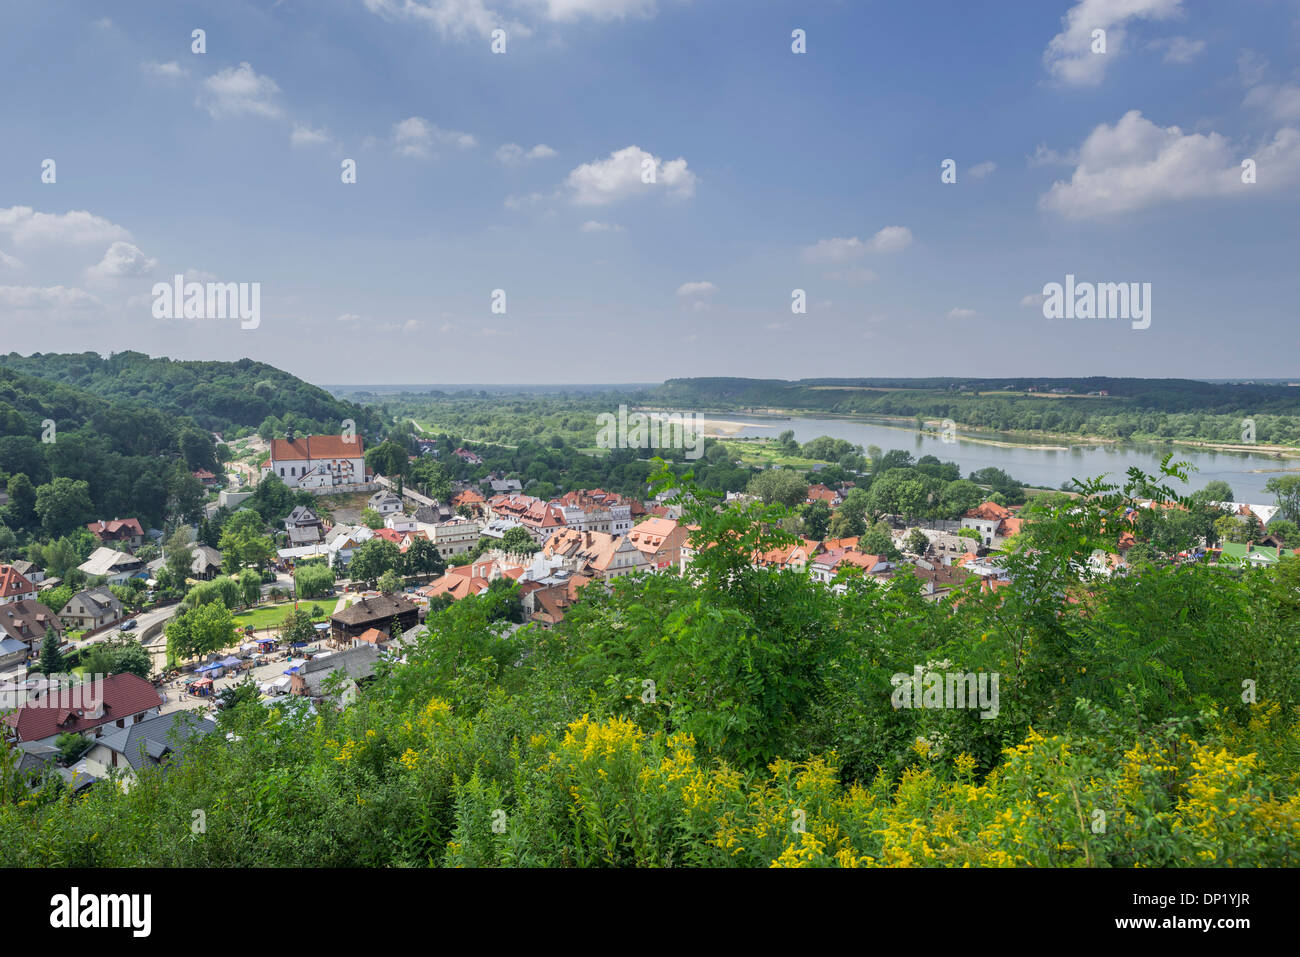 View over the city from the Hill of Three Crosses, Cholewianka, Kazimierz Dolny, Lublin Voivodeship, Poland Stock Photo